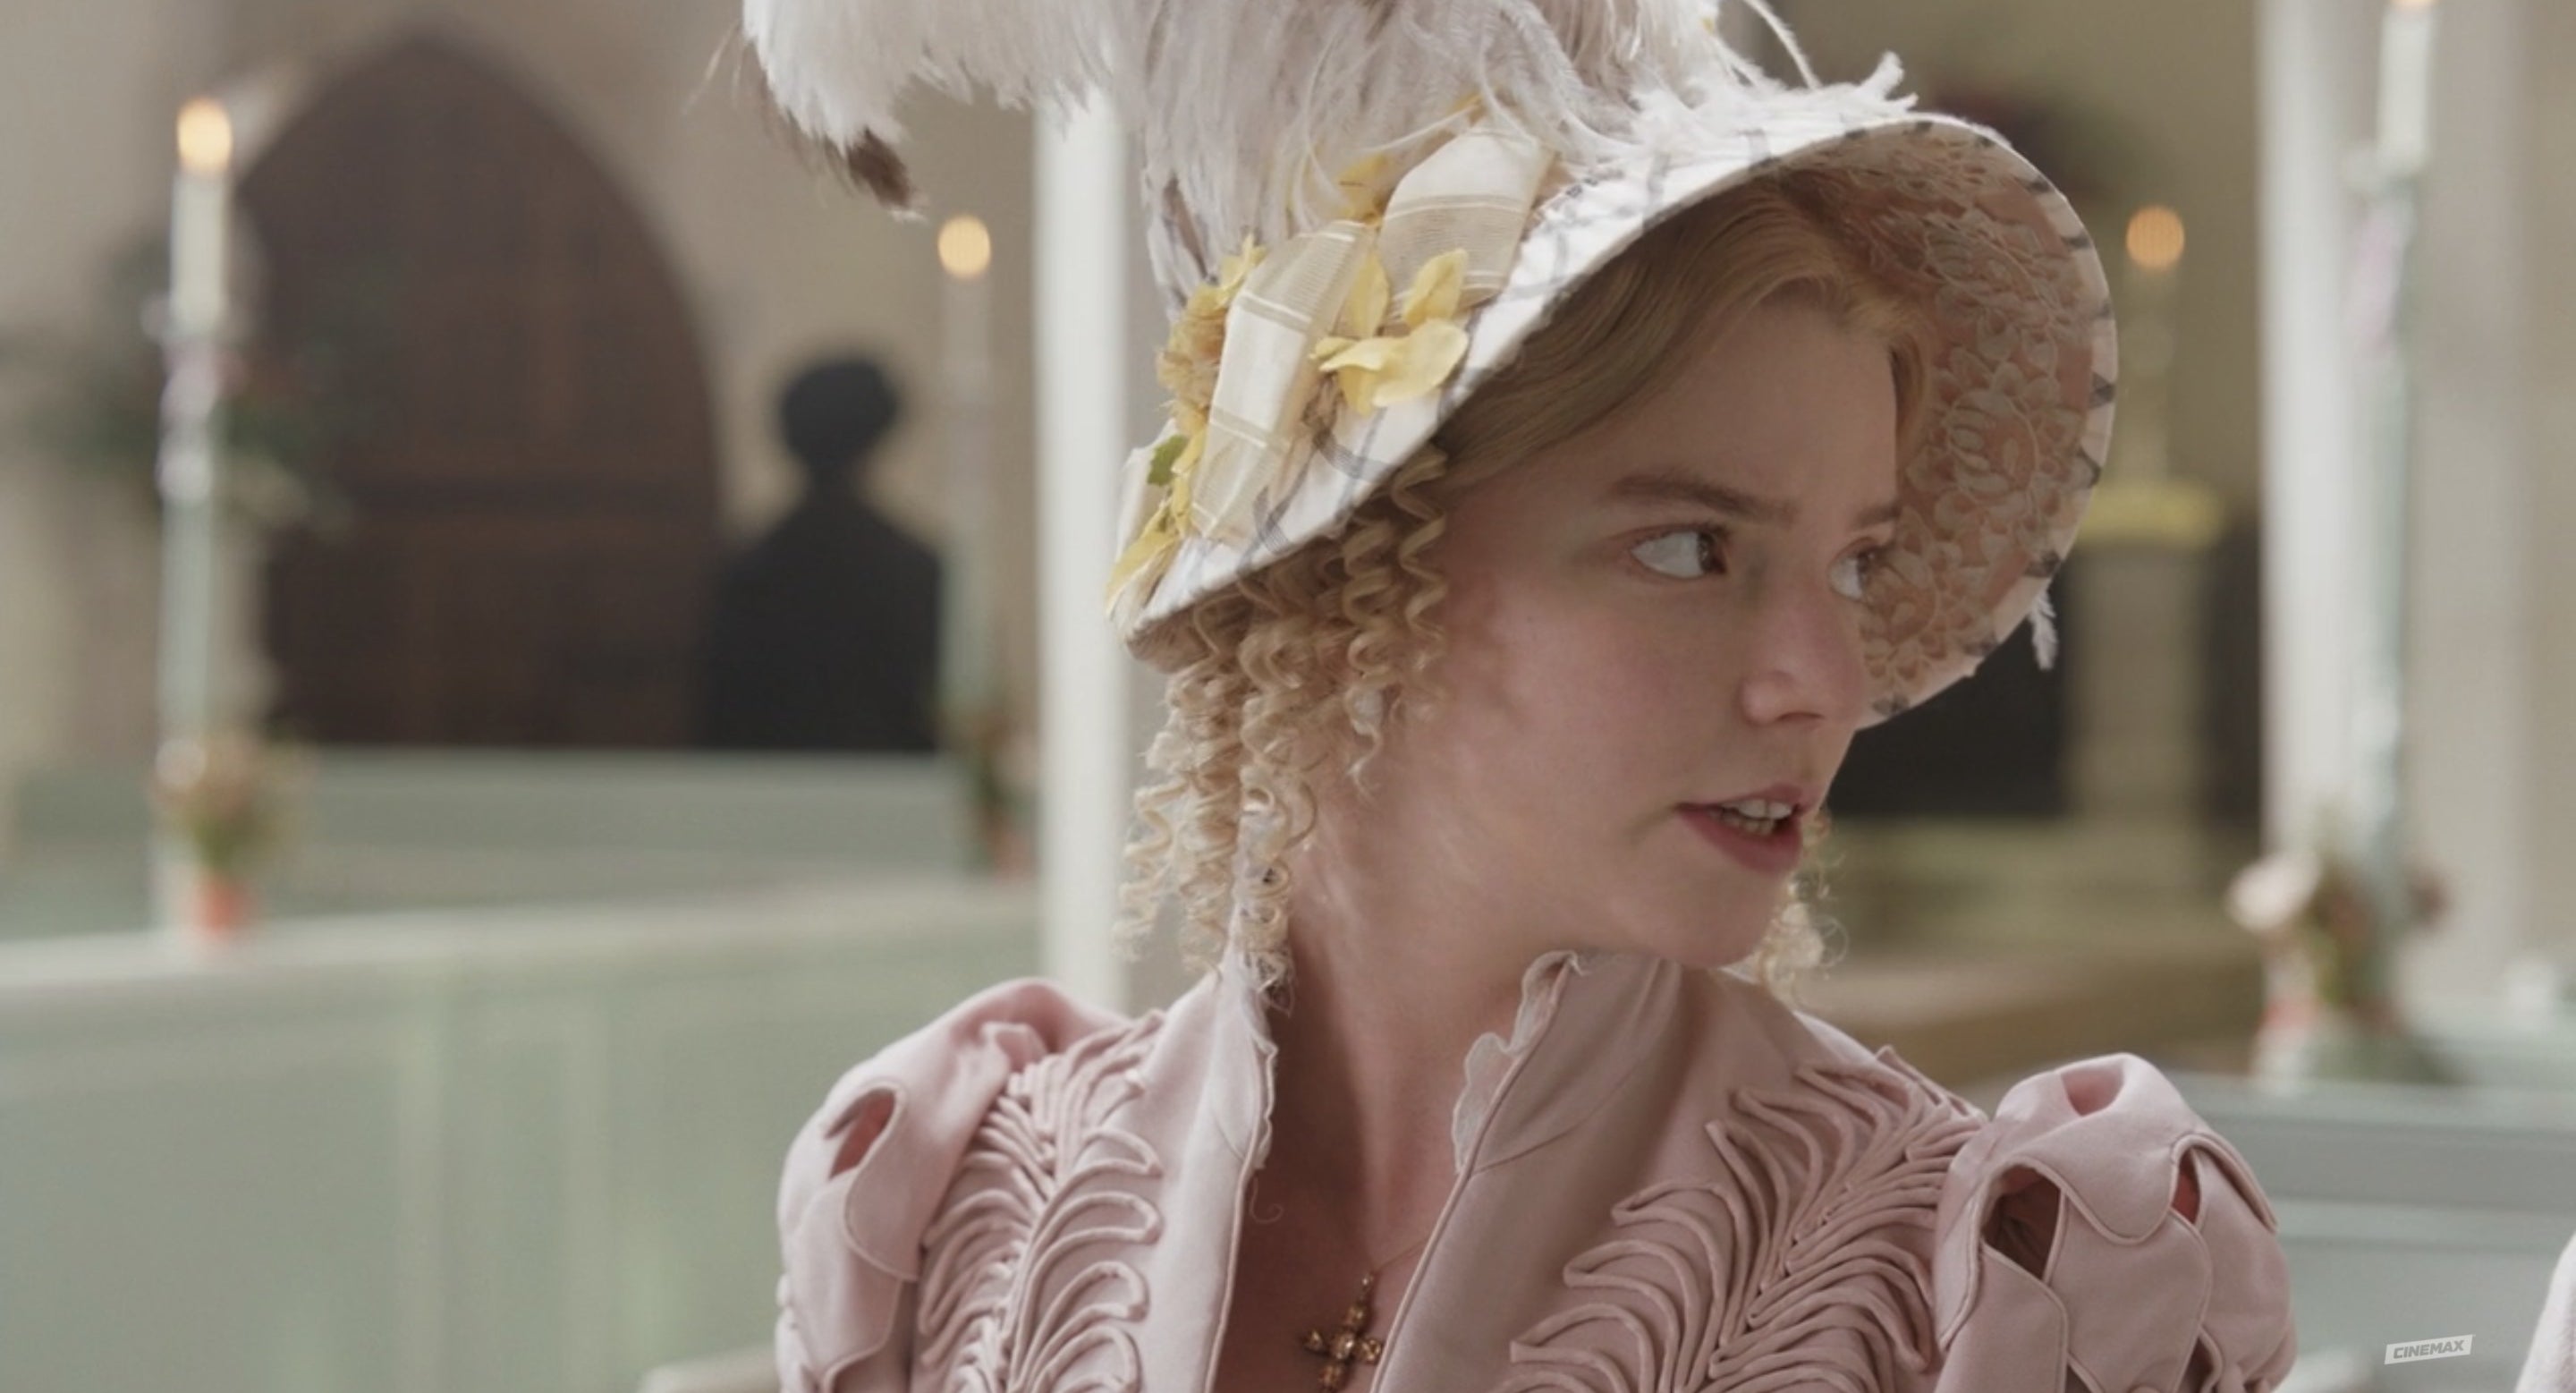 Emma wears an embellished hat complete with feathers and ribbons.